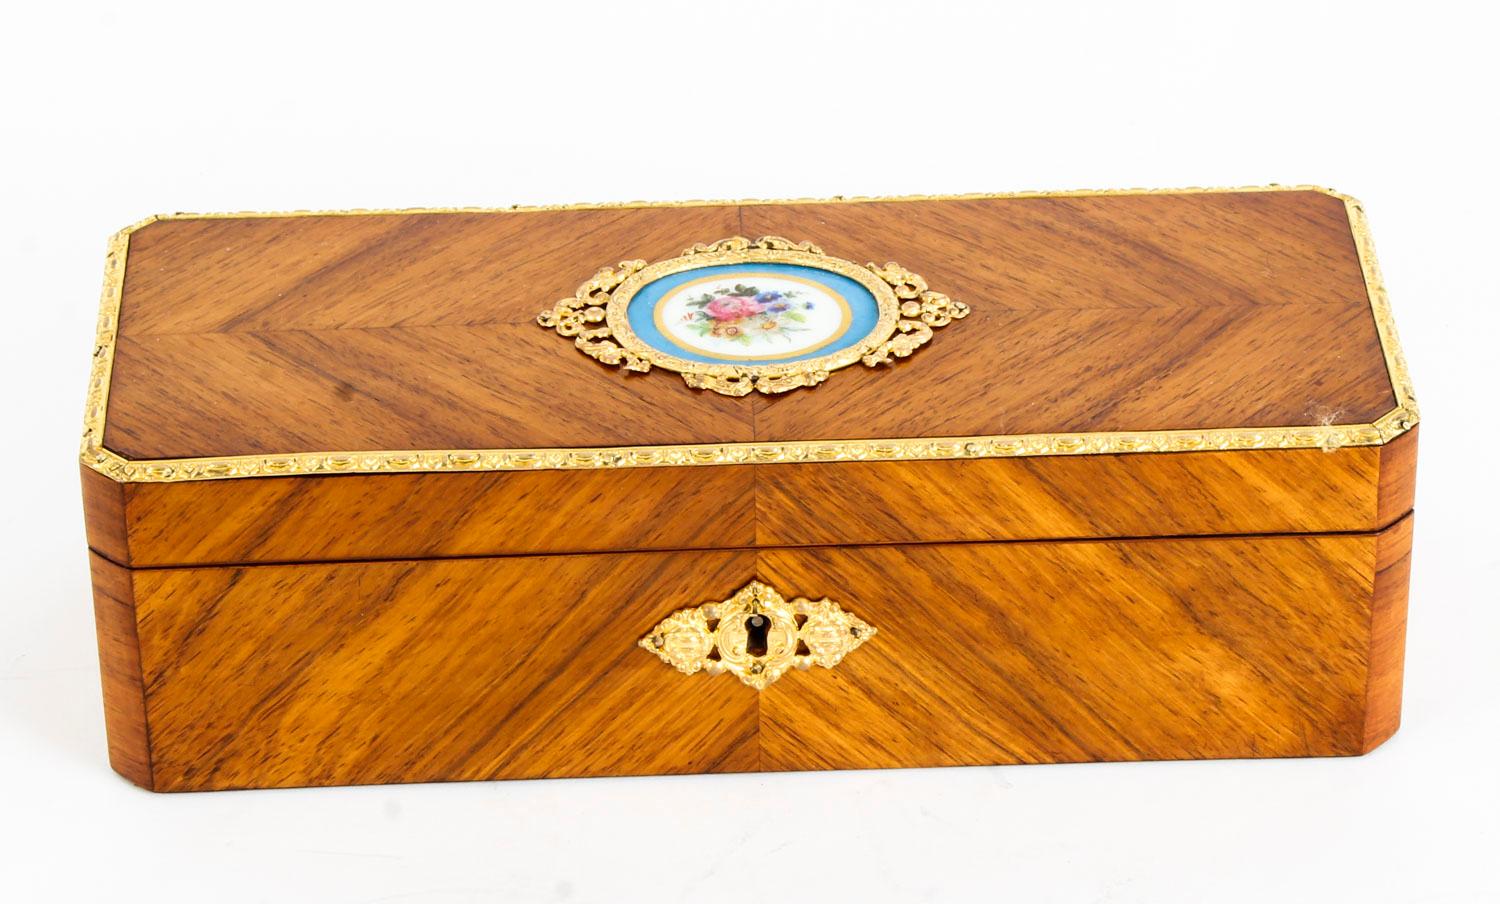 This is a beautiful antique French walnut jewel casket, circa 1870 in date.

Made from Kingwood with a decorative ormolu border and an inset central Sevres oval porcelain plaque, handpainted with a floral bouquet. With Royal Blue velvet lined